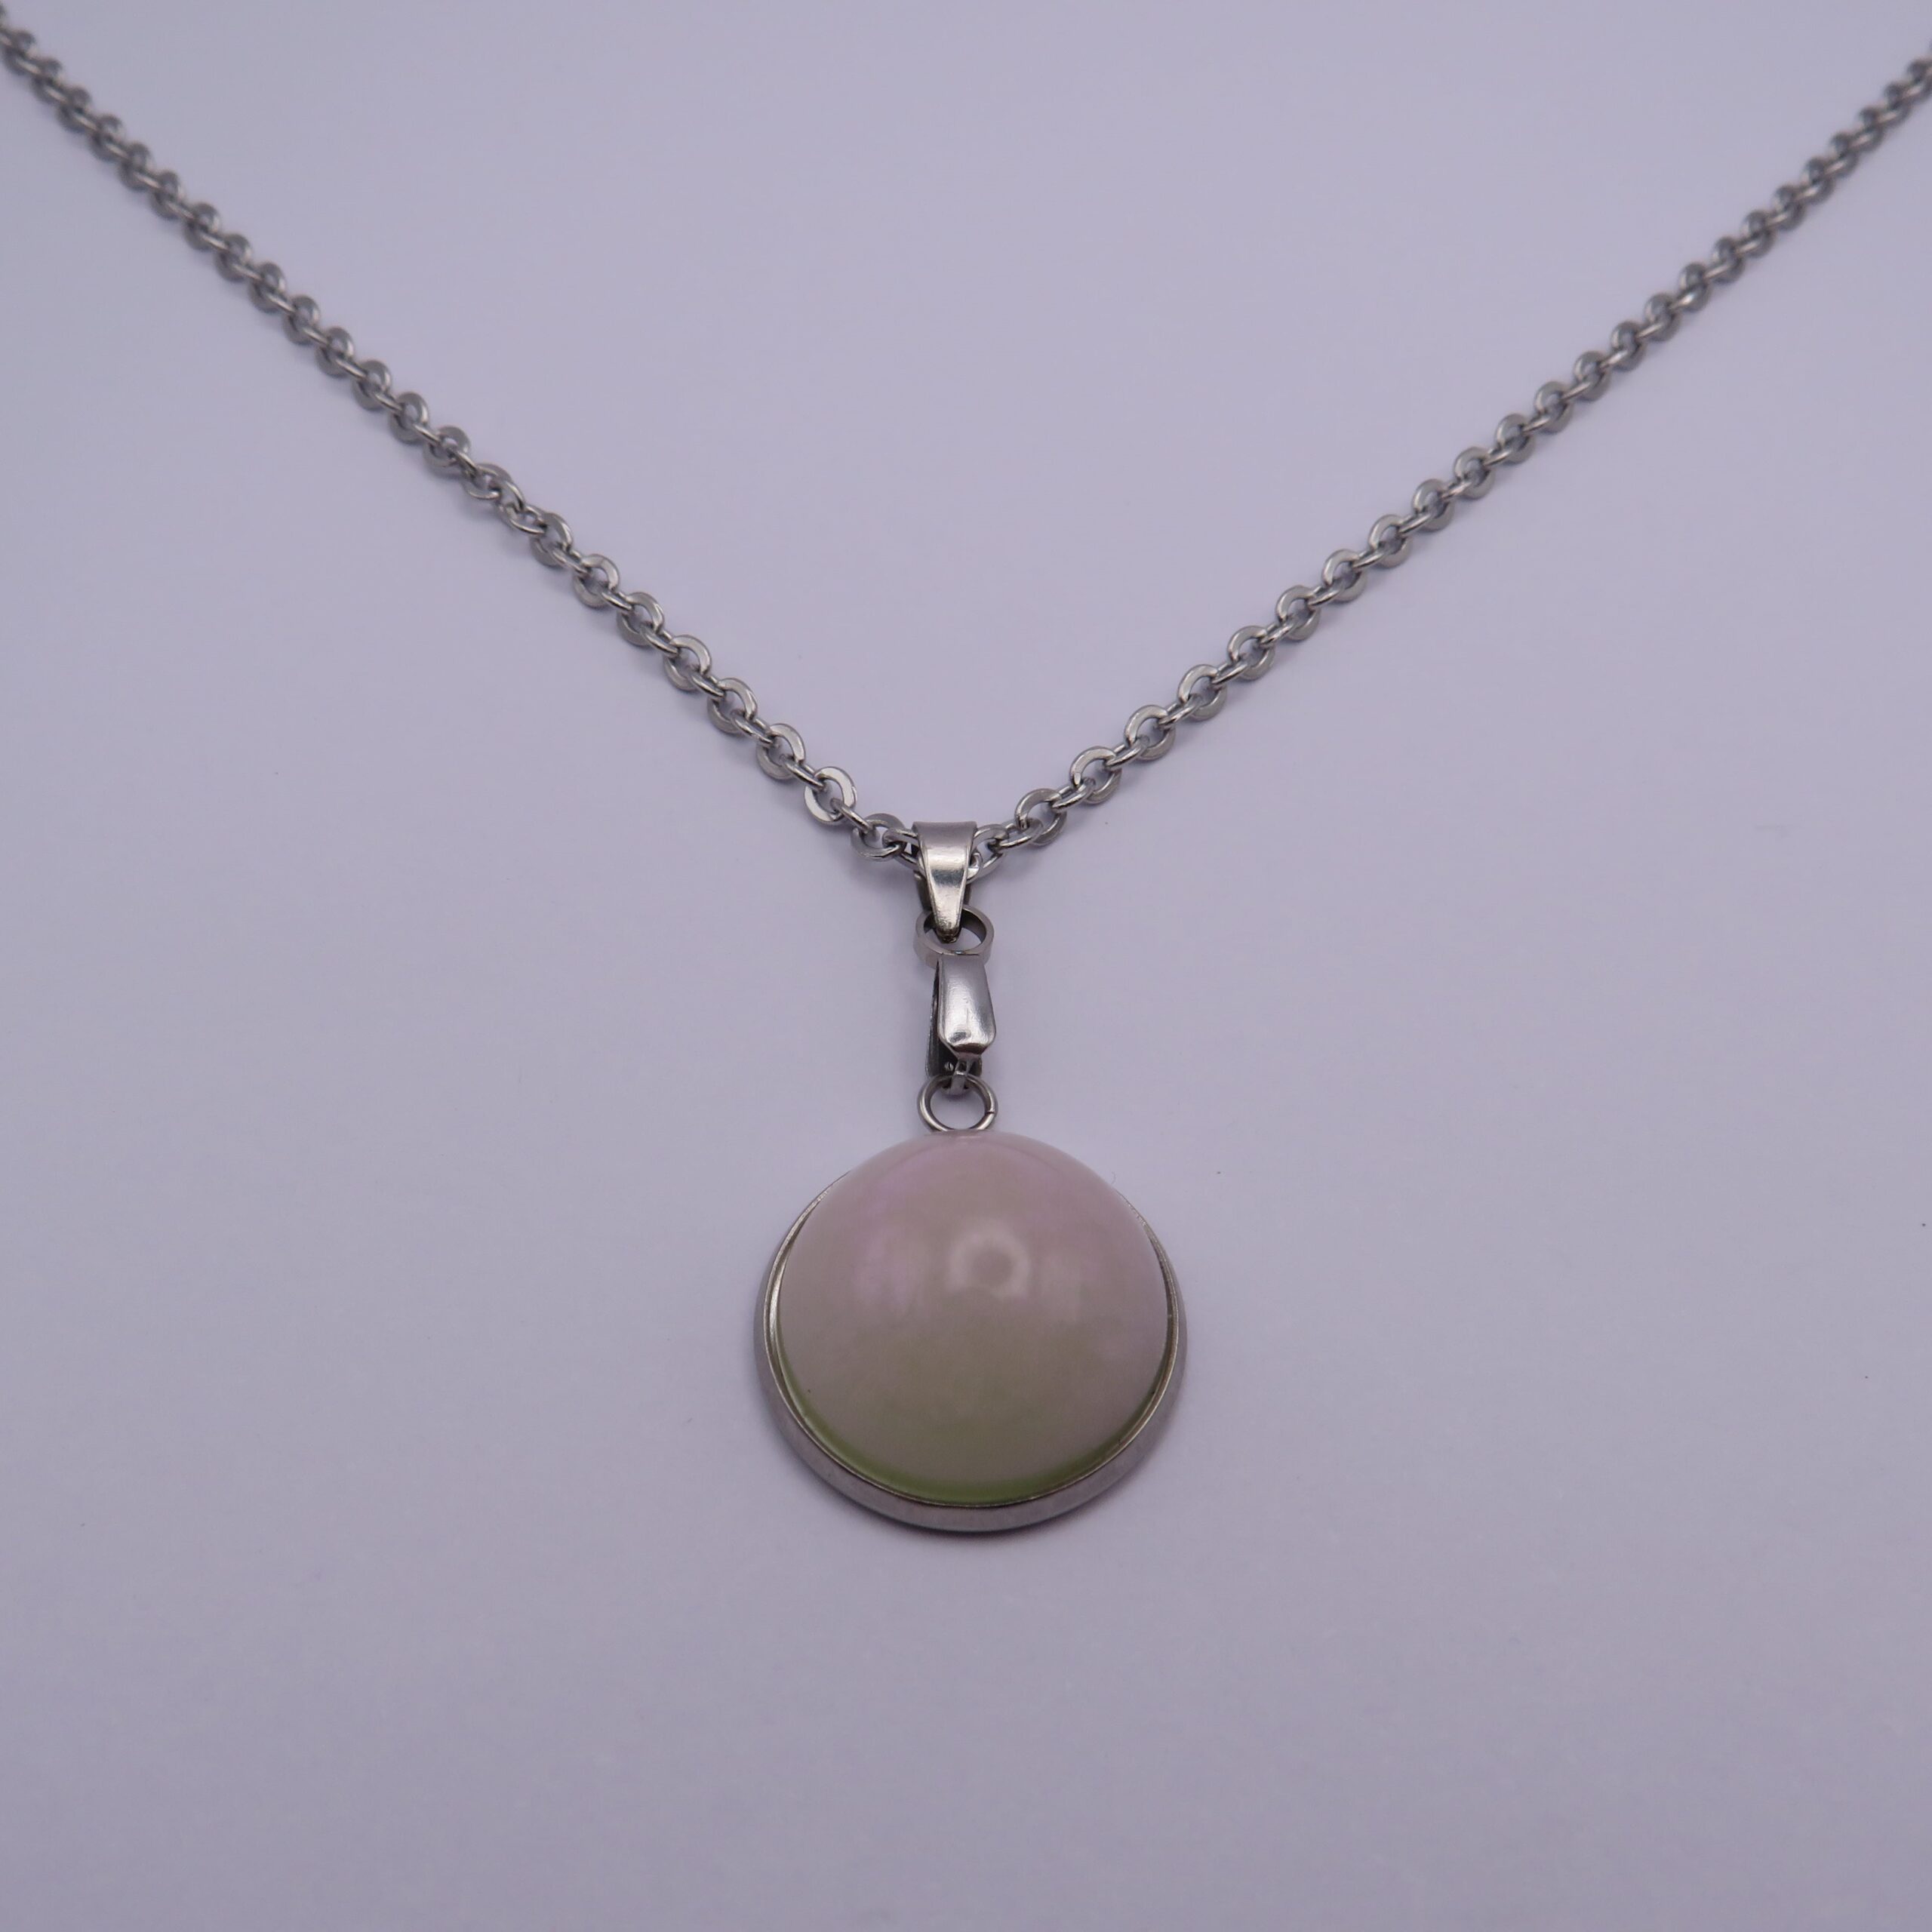 Stainless Steel White Resin Cabochon Large Pendant Necklace